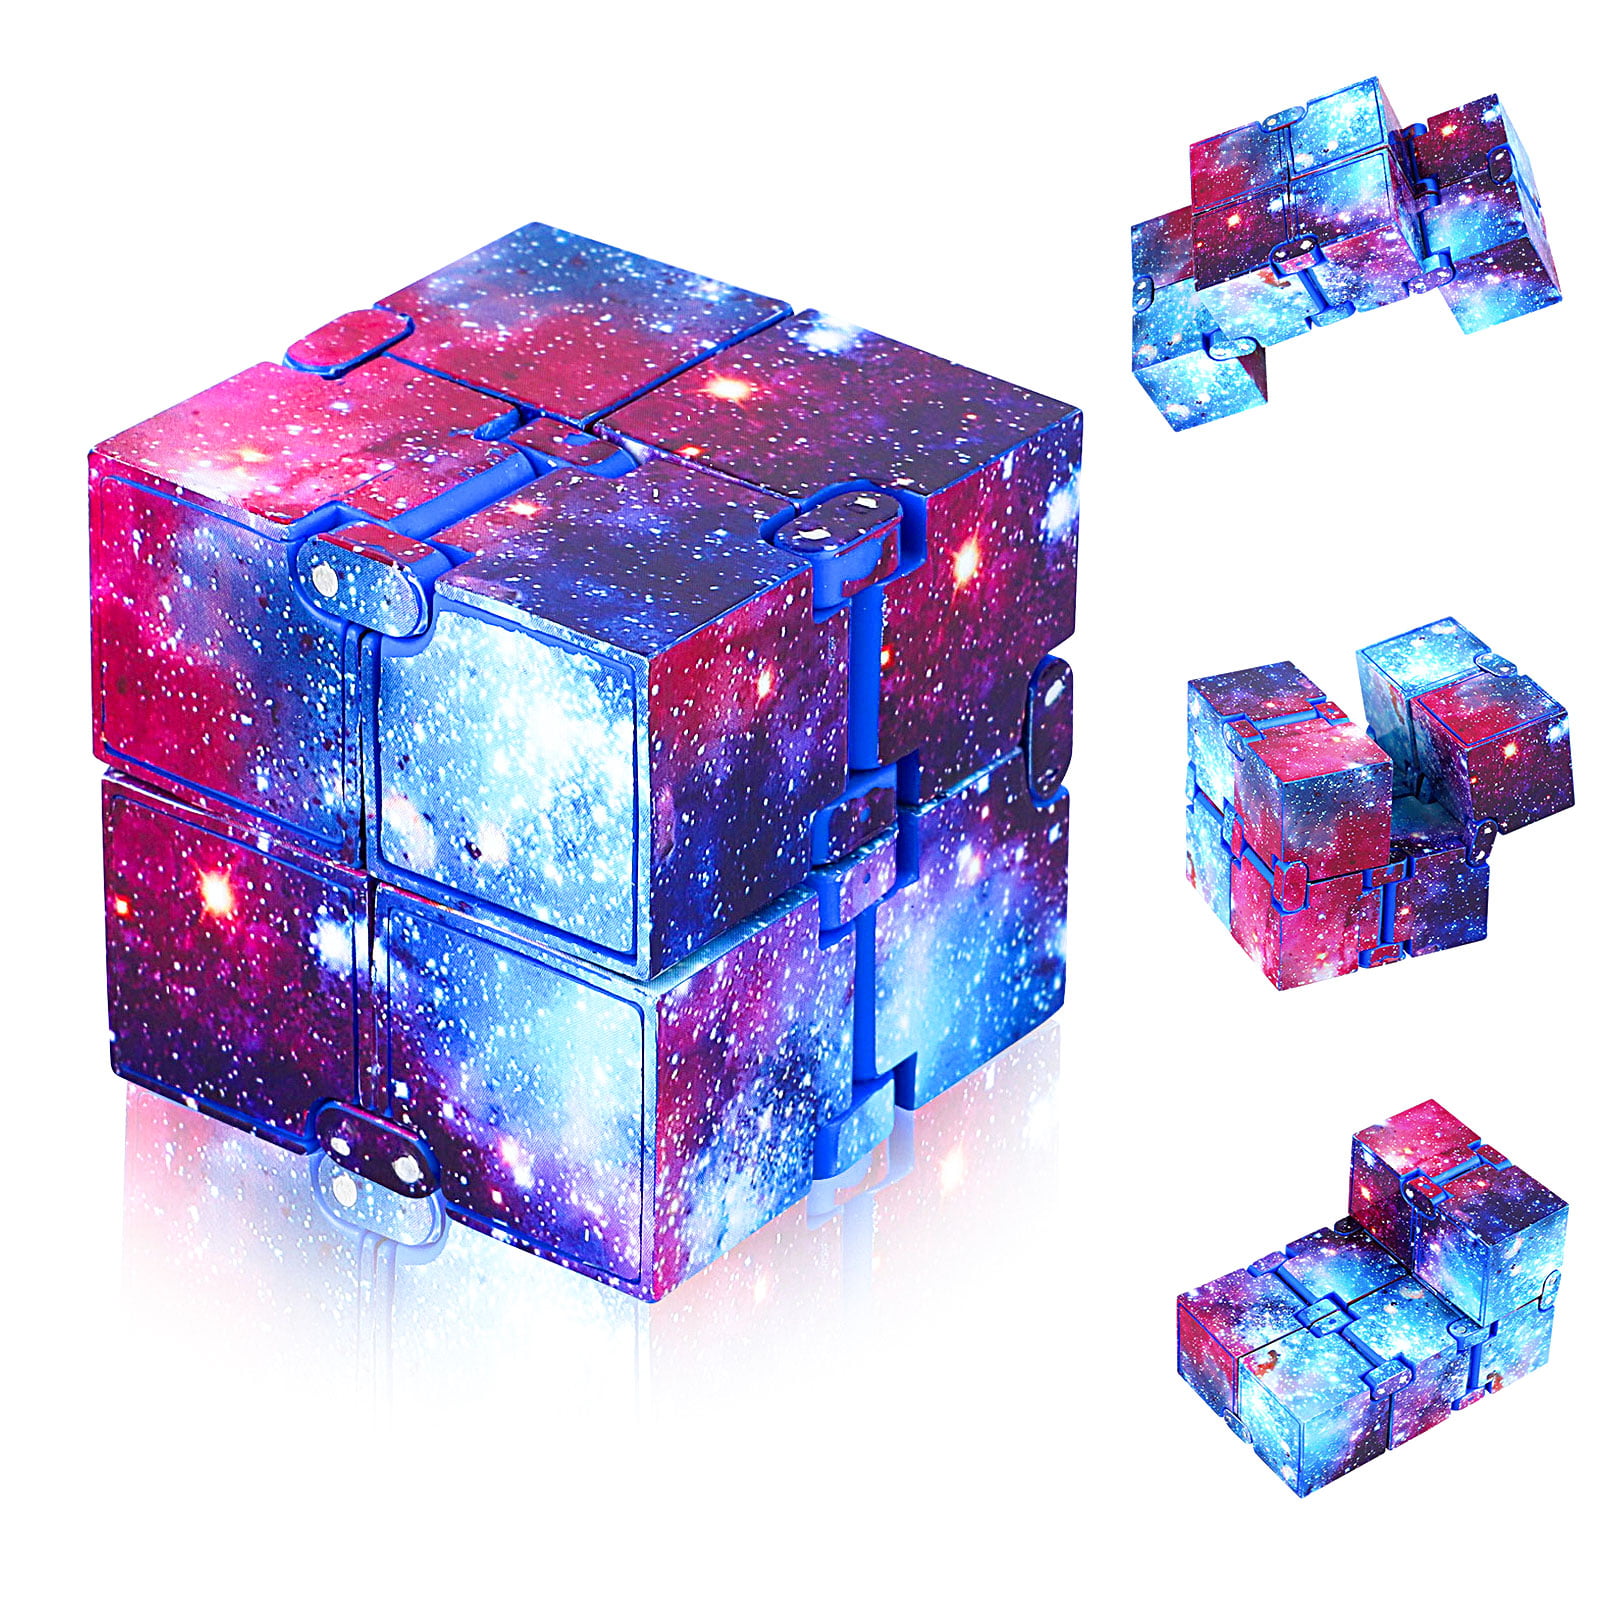 Details about   Sensory Infinity Cube EDC For Stress Relief Fidget Anti Anxiety Fun Toy and gift 